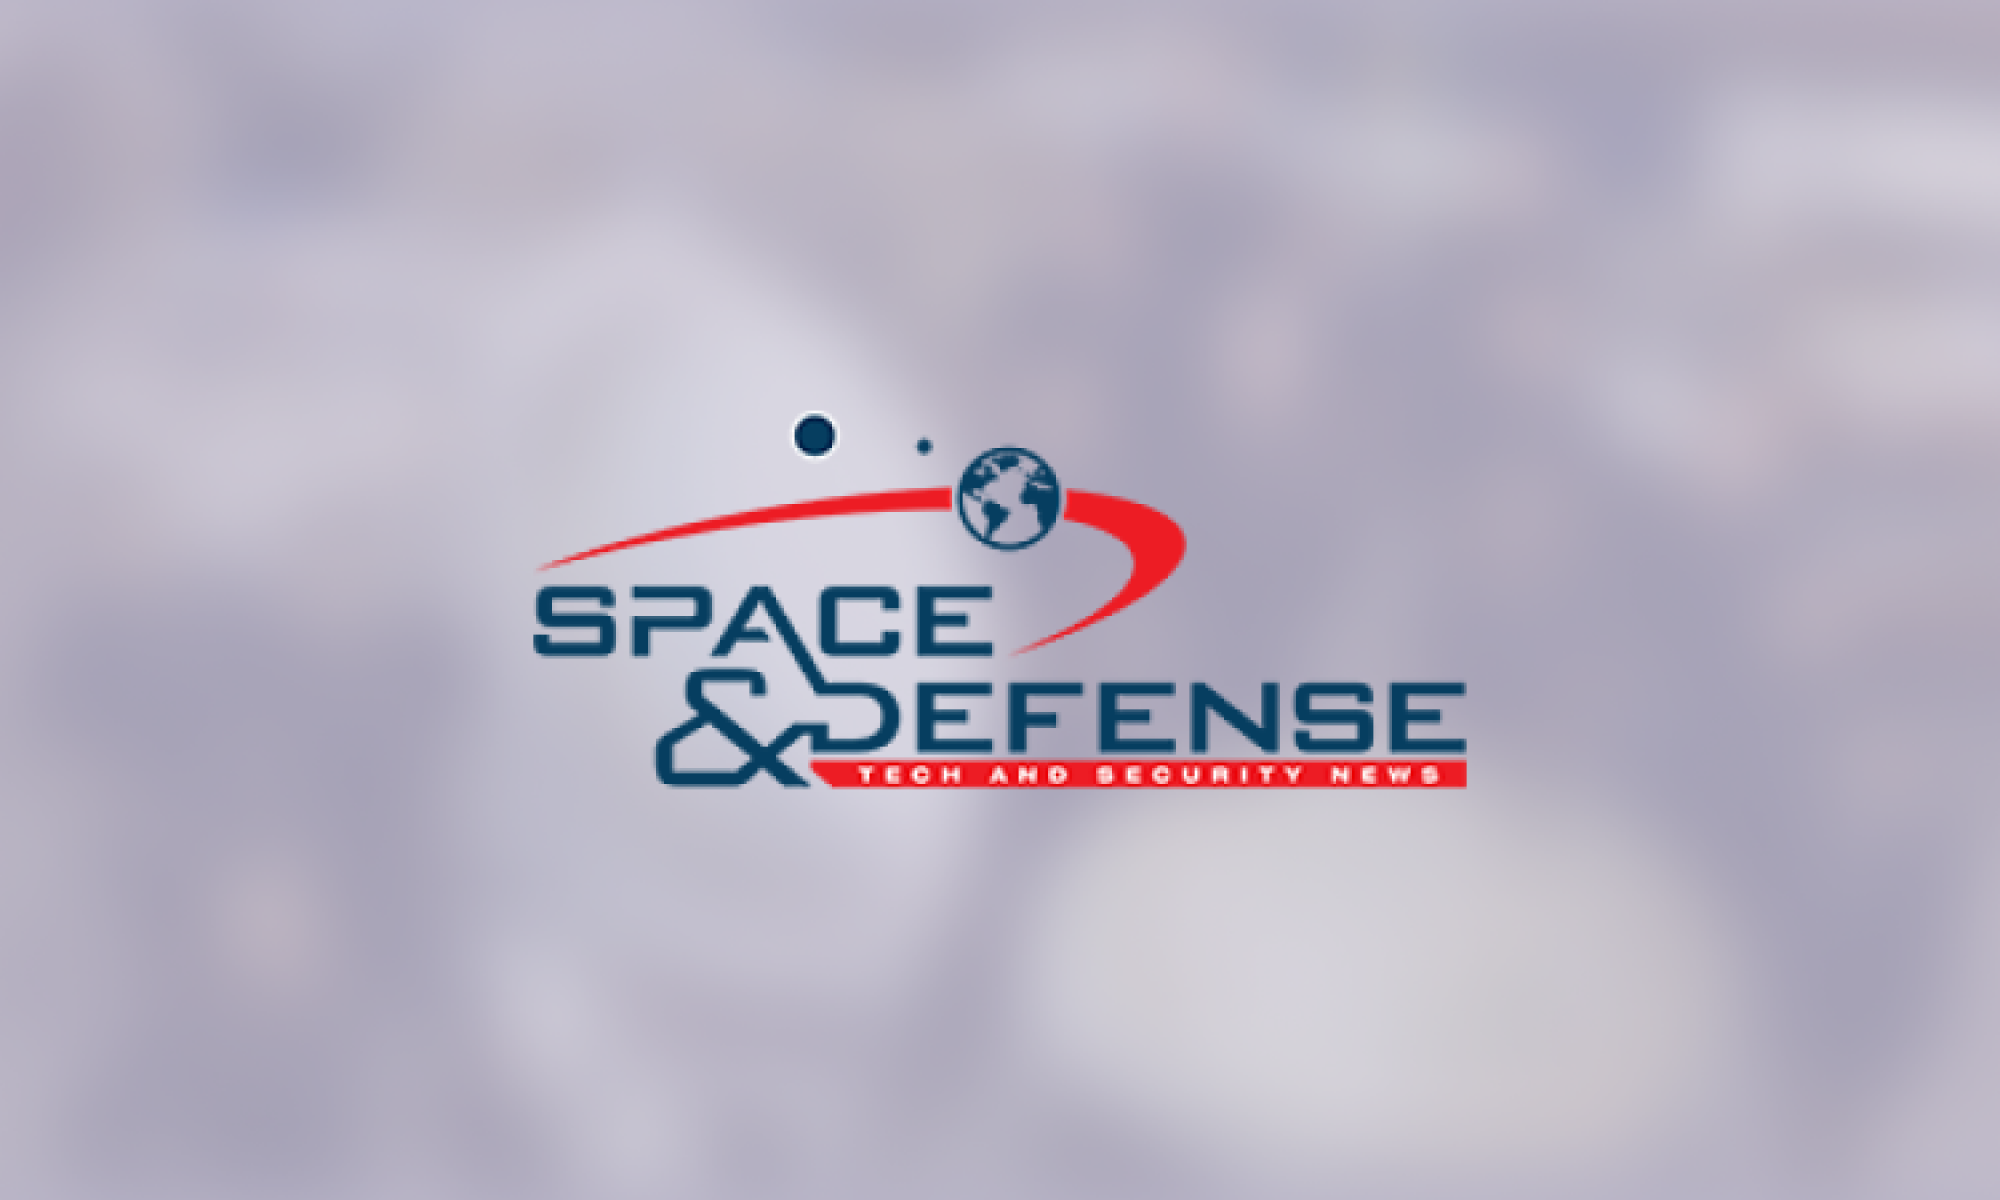 News cover image for Space & Defence